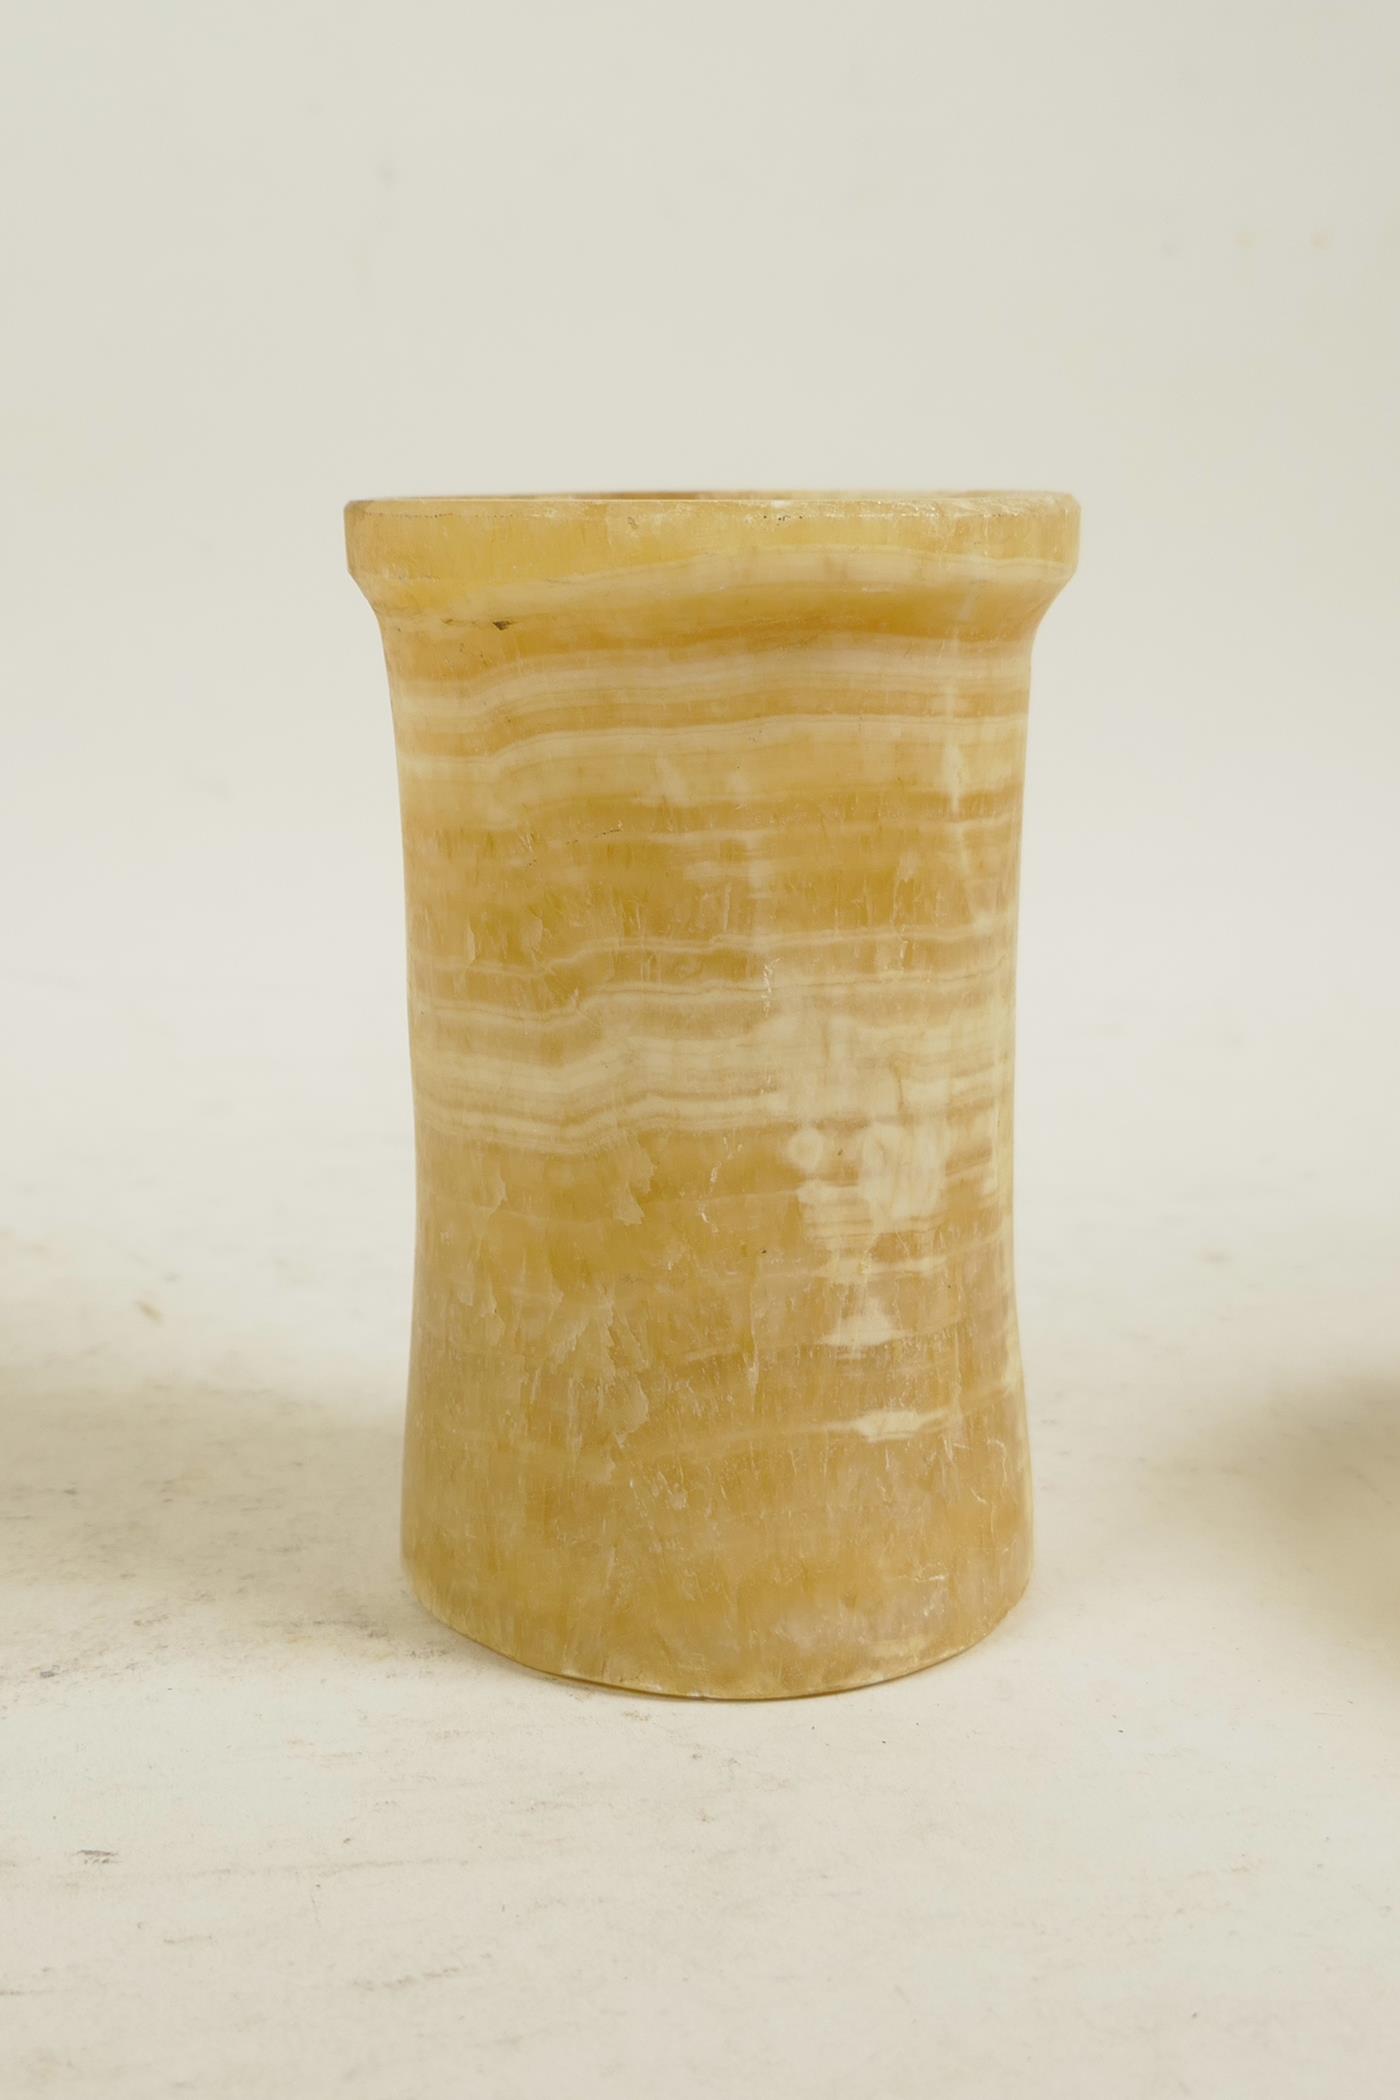 An Egyptian alabaster conical bowl and an alabaster pot, largest 4" high - Image 4 of 5